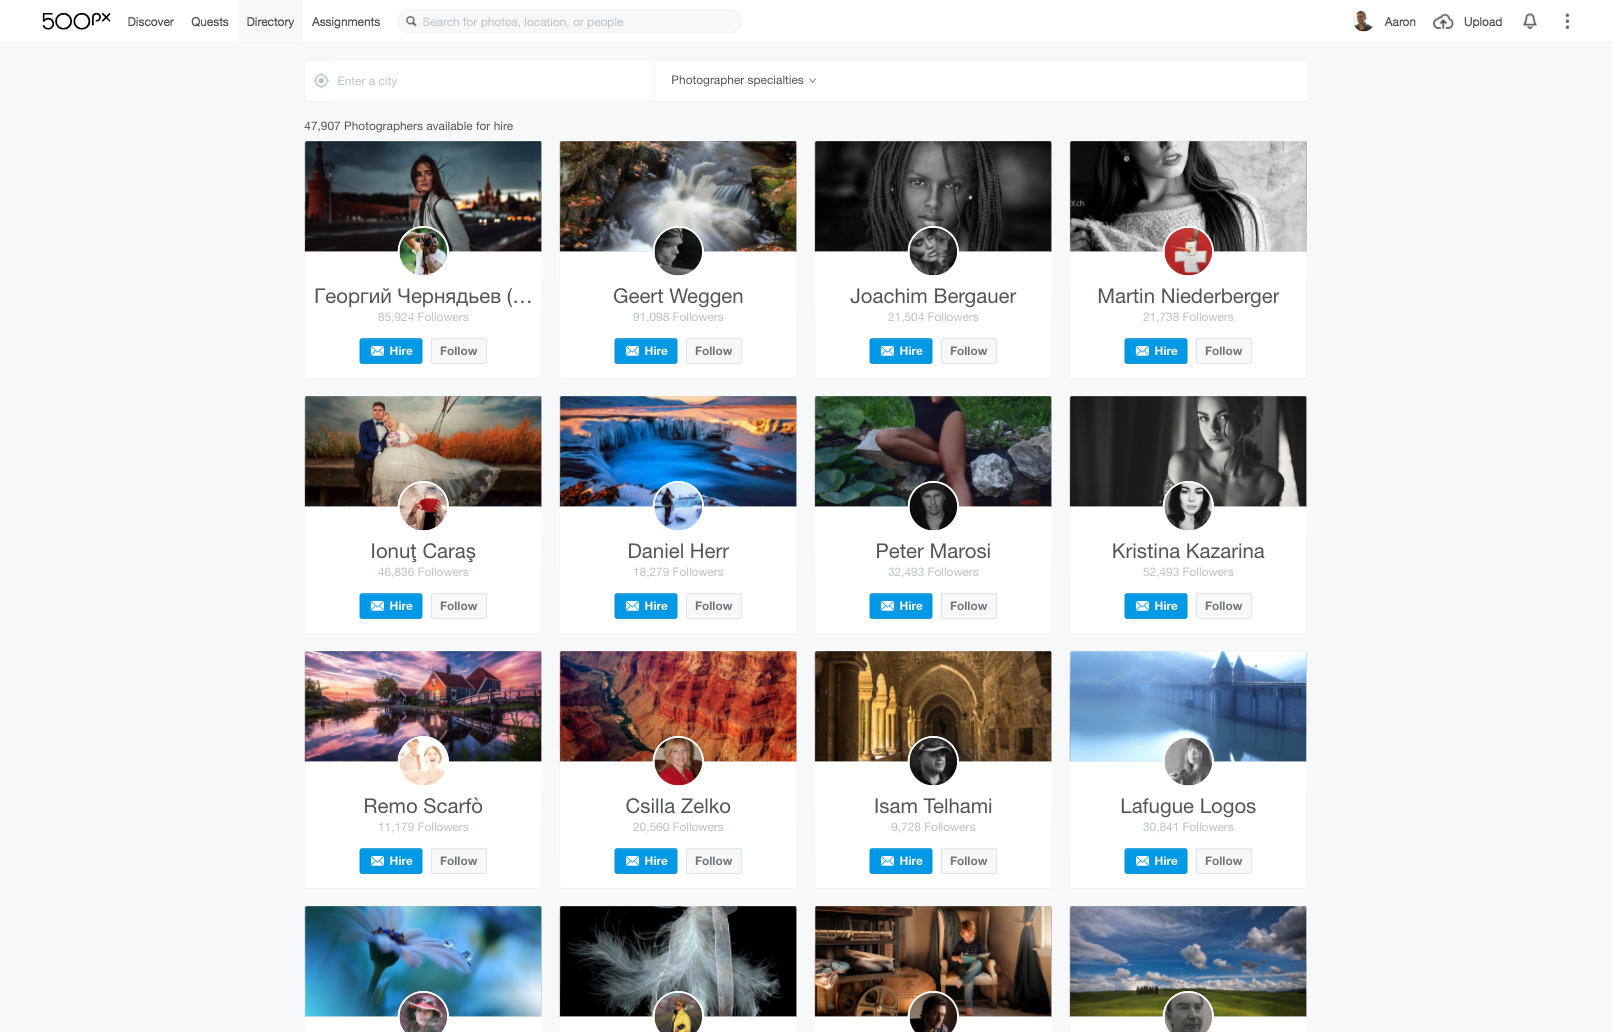 500px Announces New Directory & Partnership With Adobe Stock